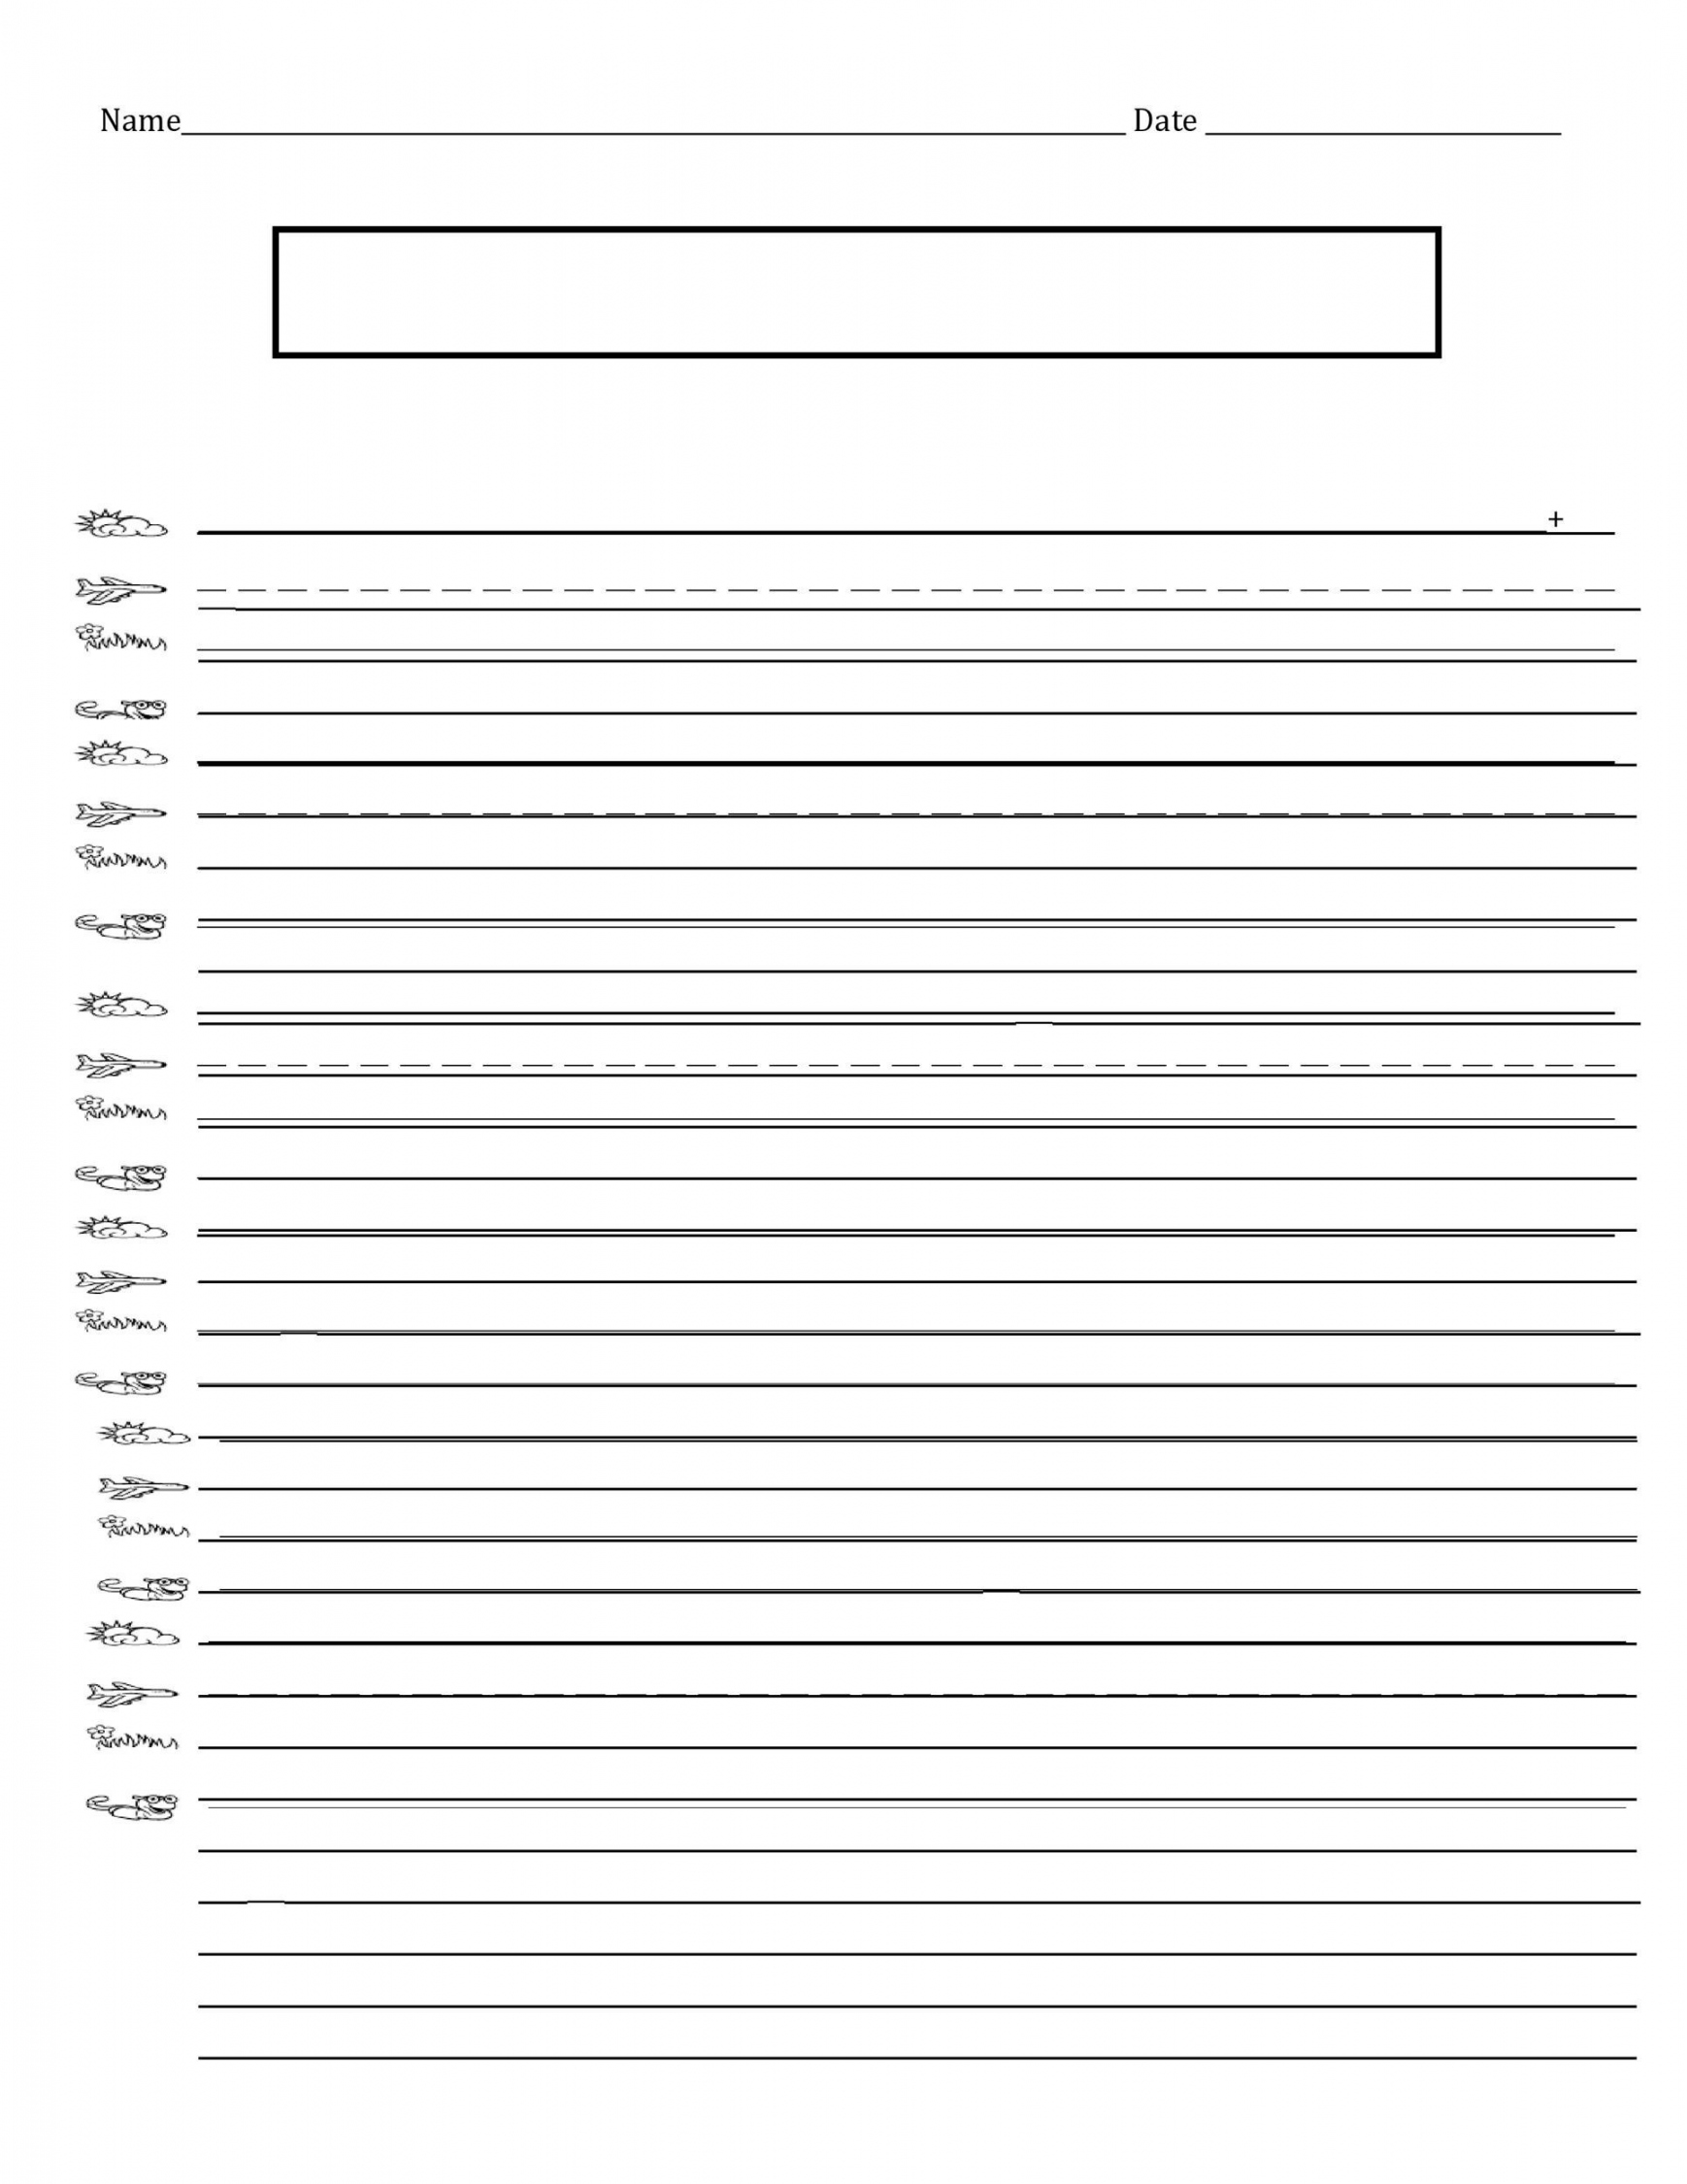 Printable Lined Paper Templates ᐅ TemplateLab - FREE Printables - Ruled Paper Printable